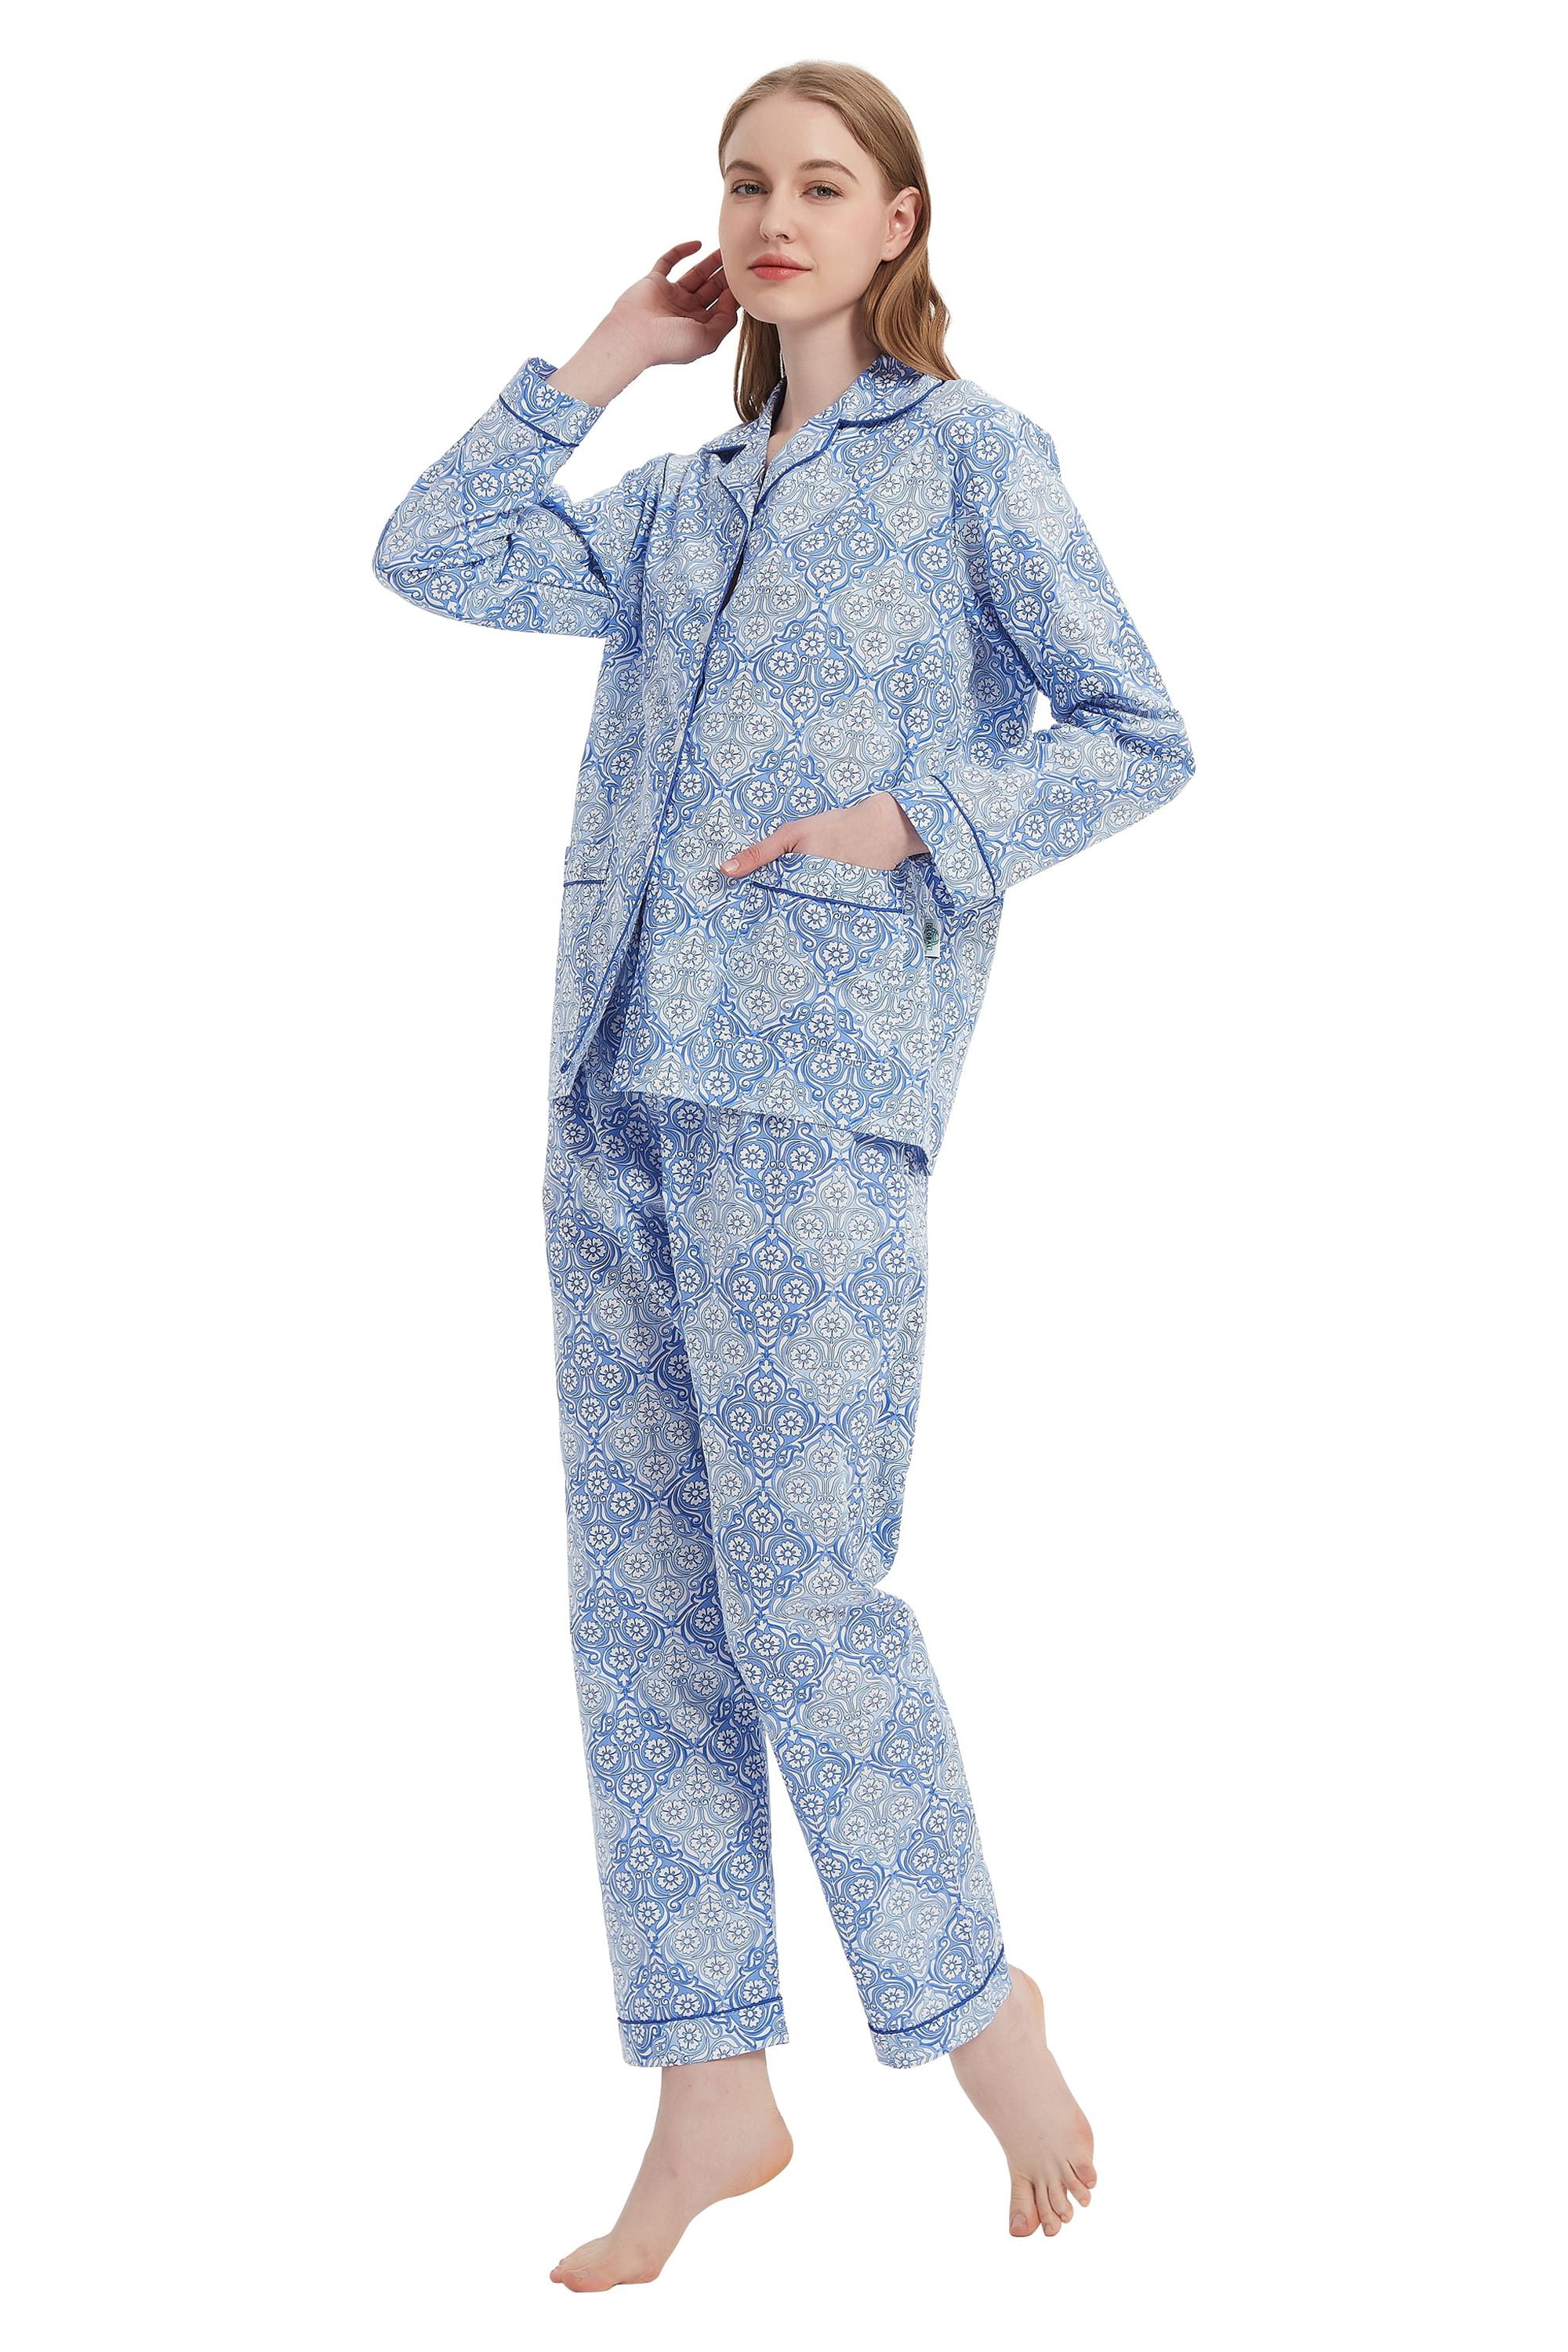 Buy SK Hosiery : Women's & Girls Cotton Printed Pyjama/Track Pant Lower /  100% Export Quality Soft Cotton/Combo (Set of 2) (M, Blue) at